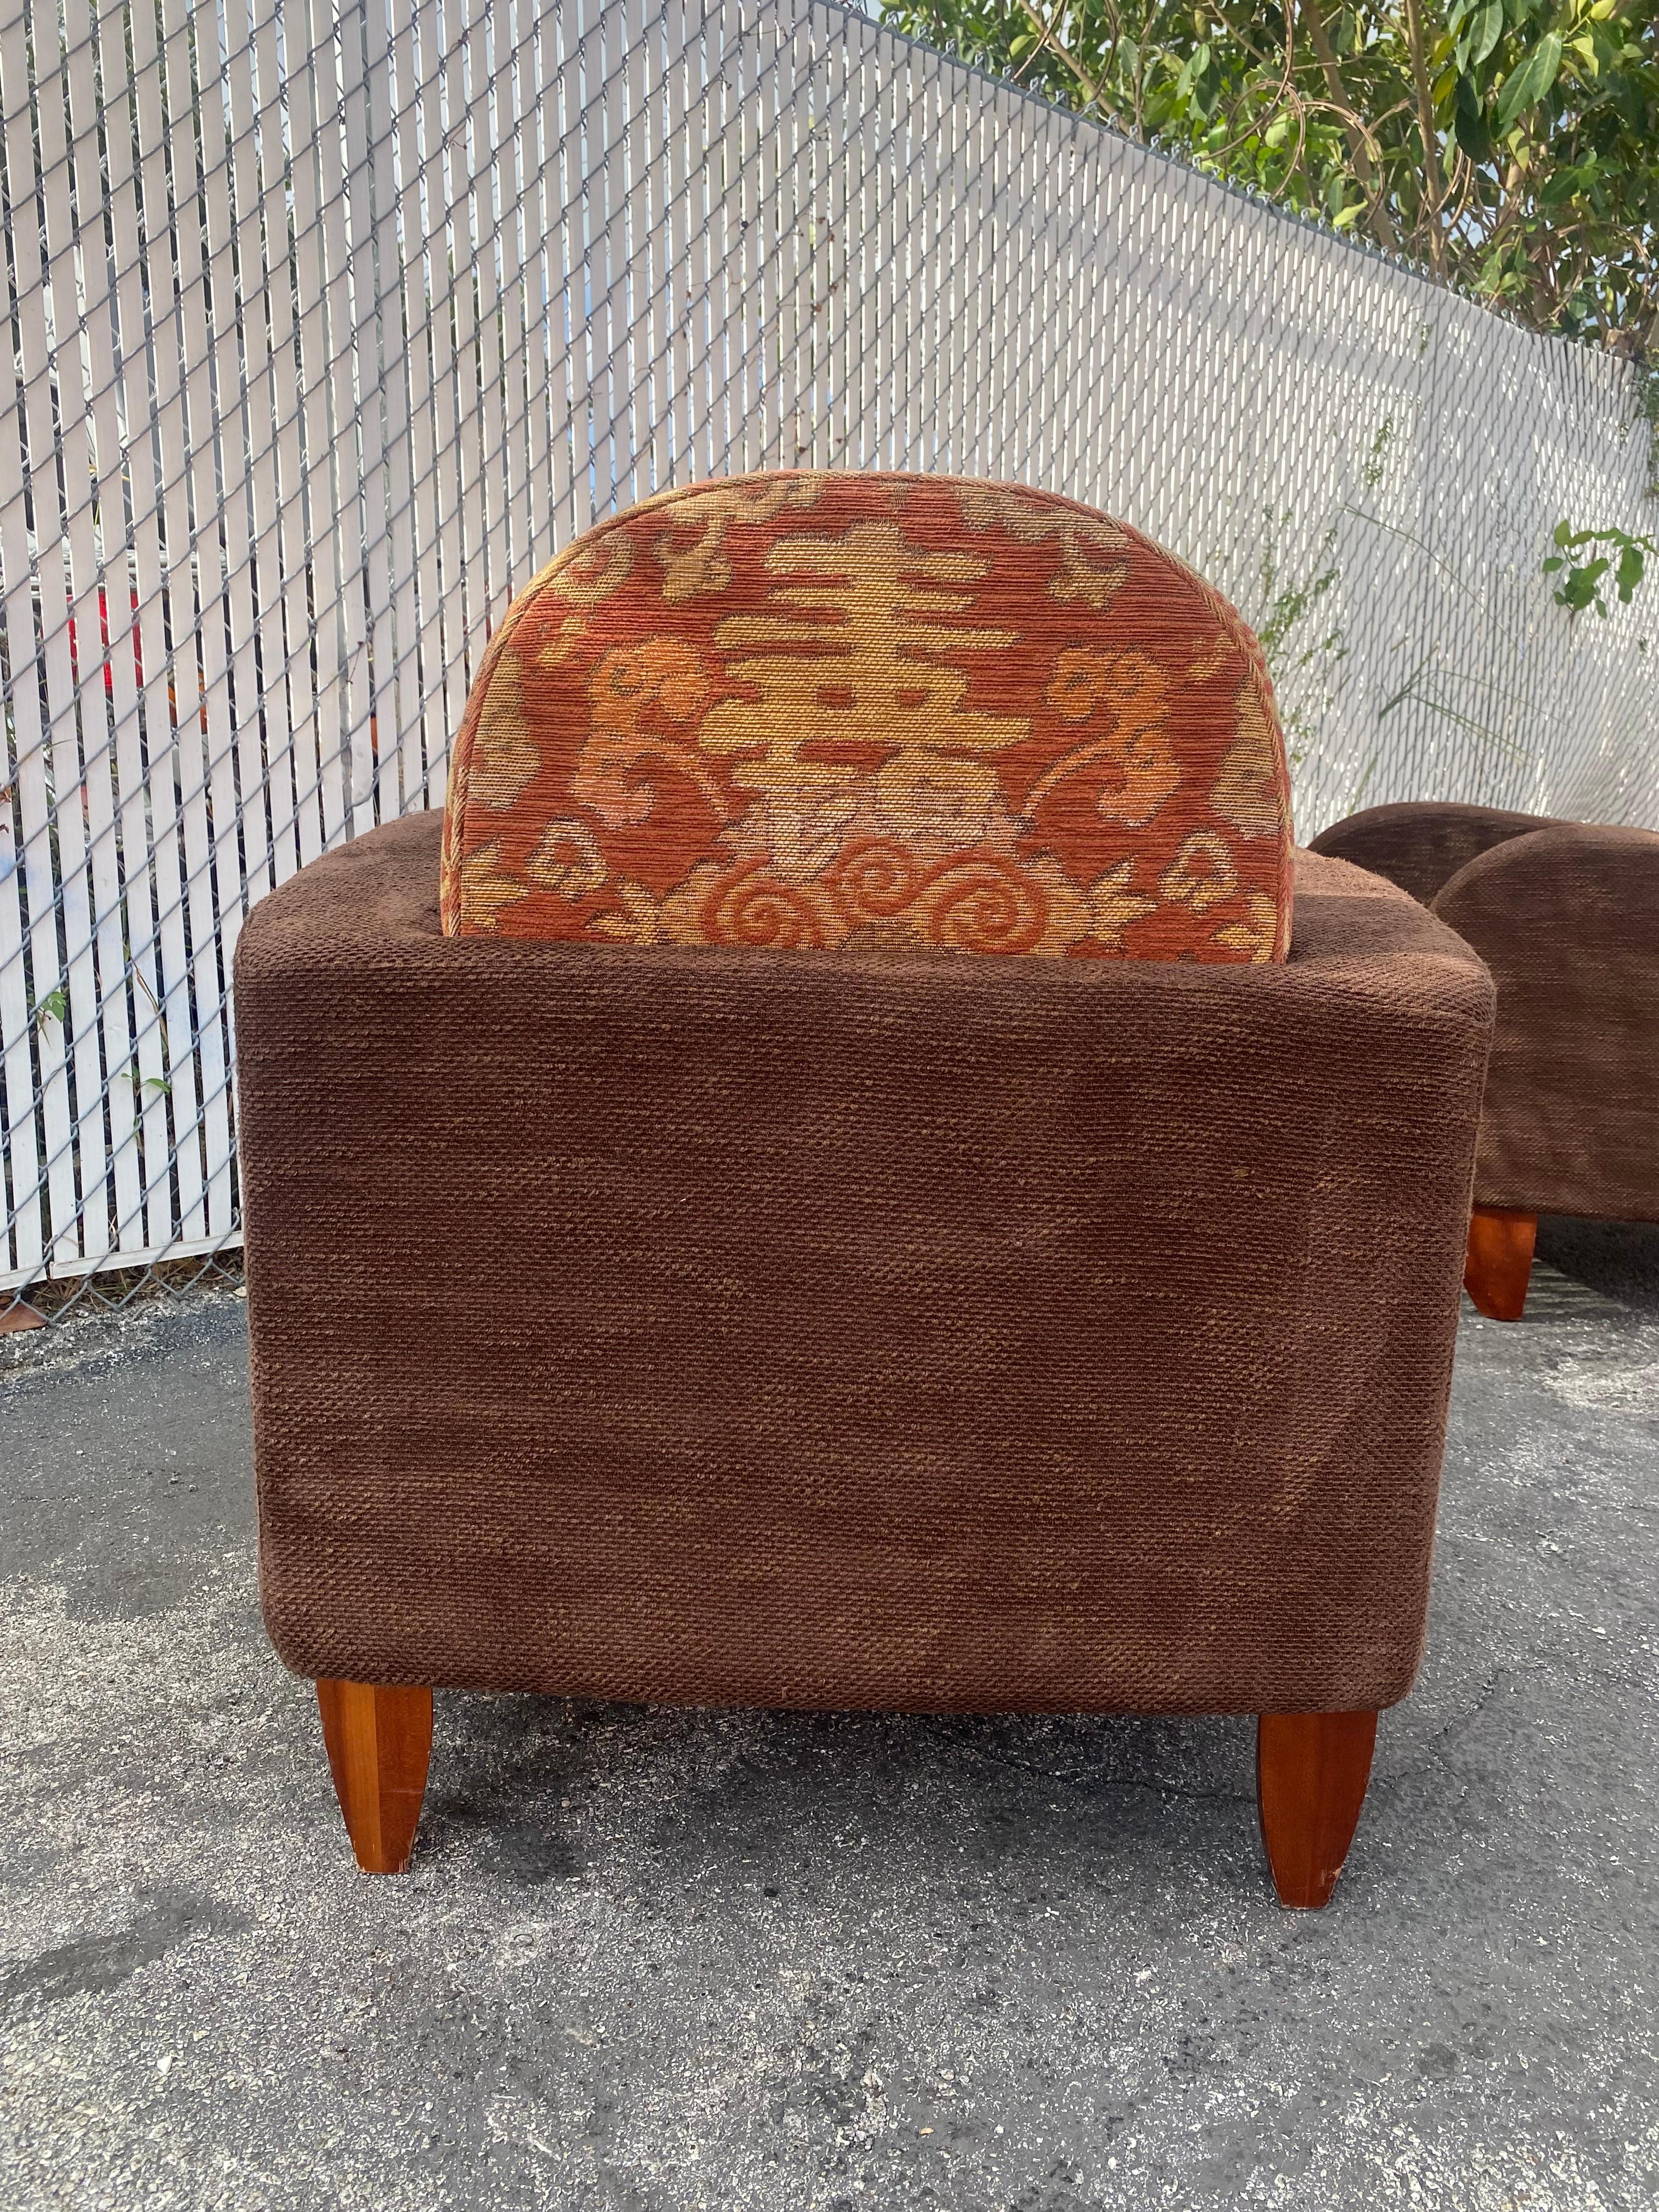 1970s Sculptural Art Deco Chenille Walnut Curved Chairs, Set of 2 For Sale 6